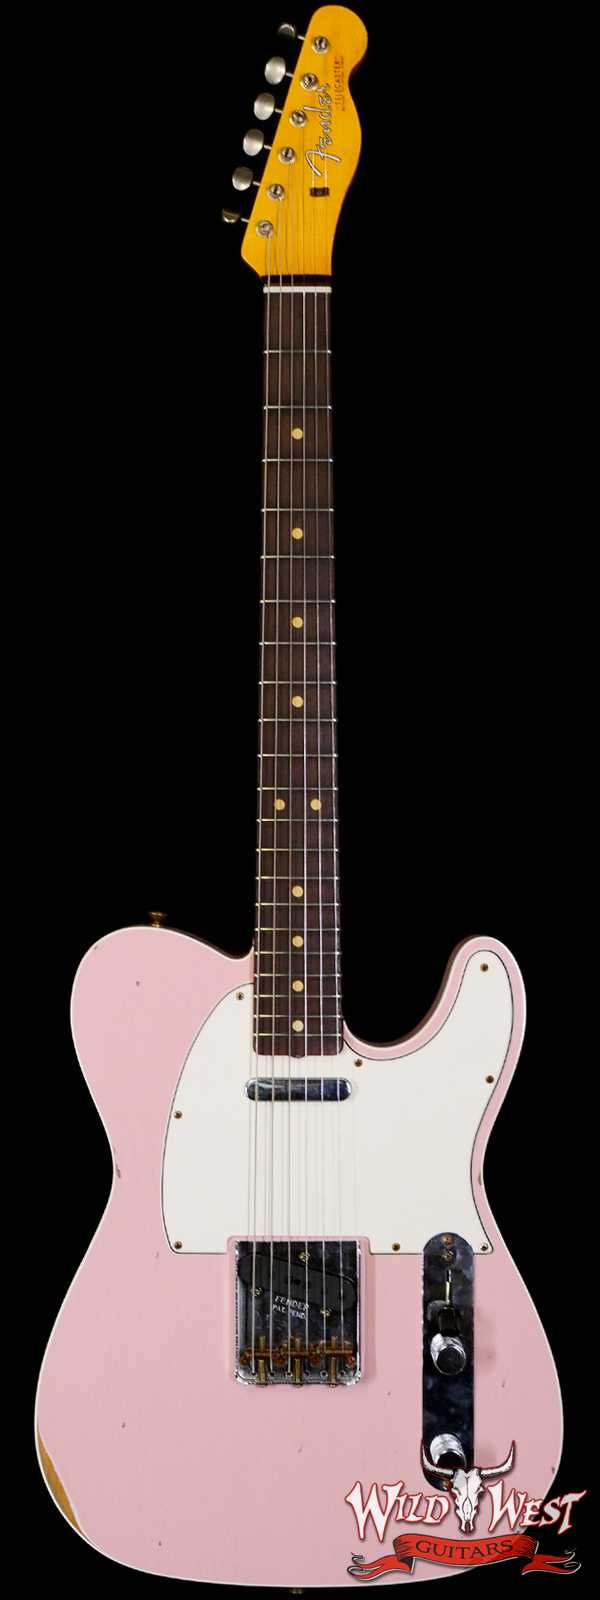 Fender Custom Shop 1962 Telecaster Custom Rosewood Slab Board Hand-Wound Pickups Relic Shell Pink 7.30 lbs